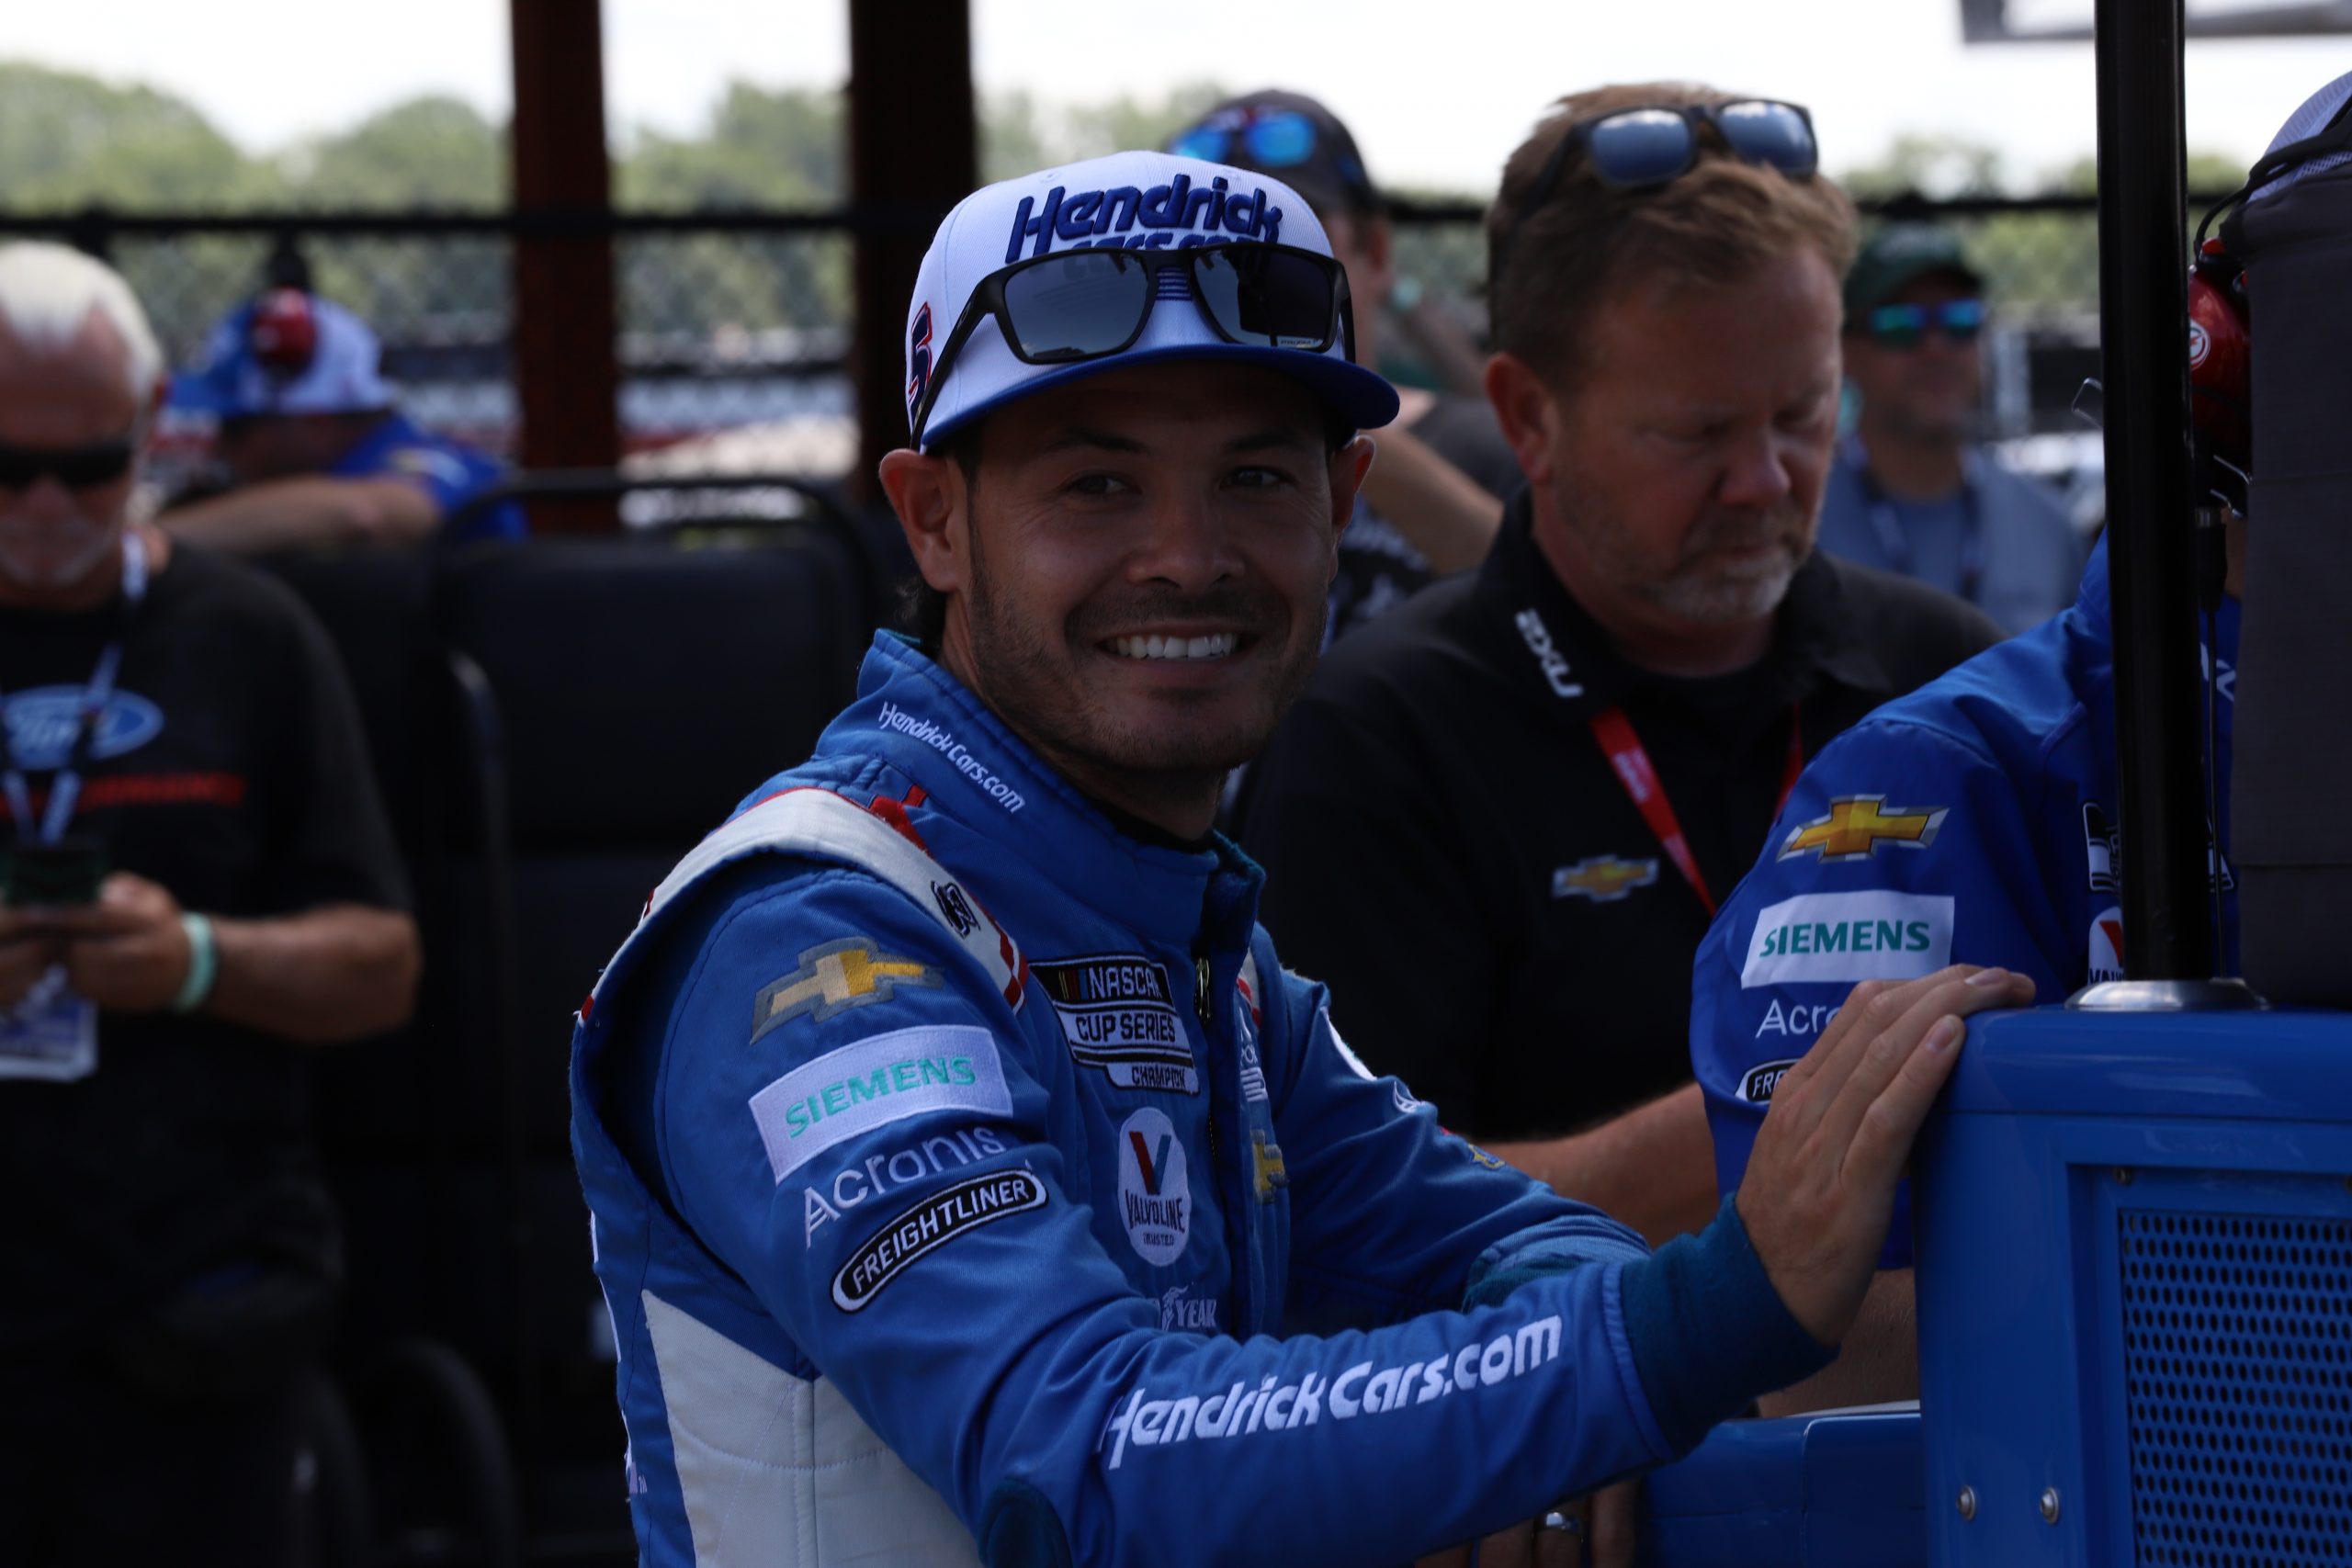 A solid eighth place qualifying effort has Kyle Larson all smiles for Sunday's race at Michigan. (Photo: Dylan Nadwodny | The Podium Finish)